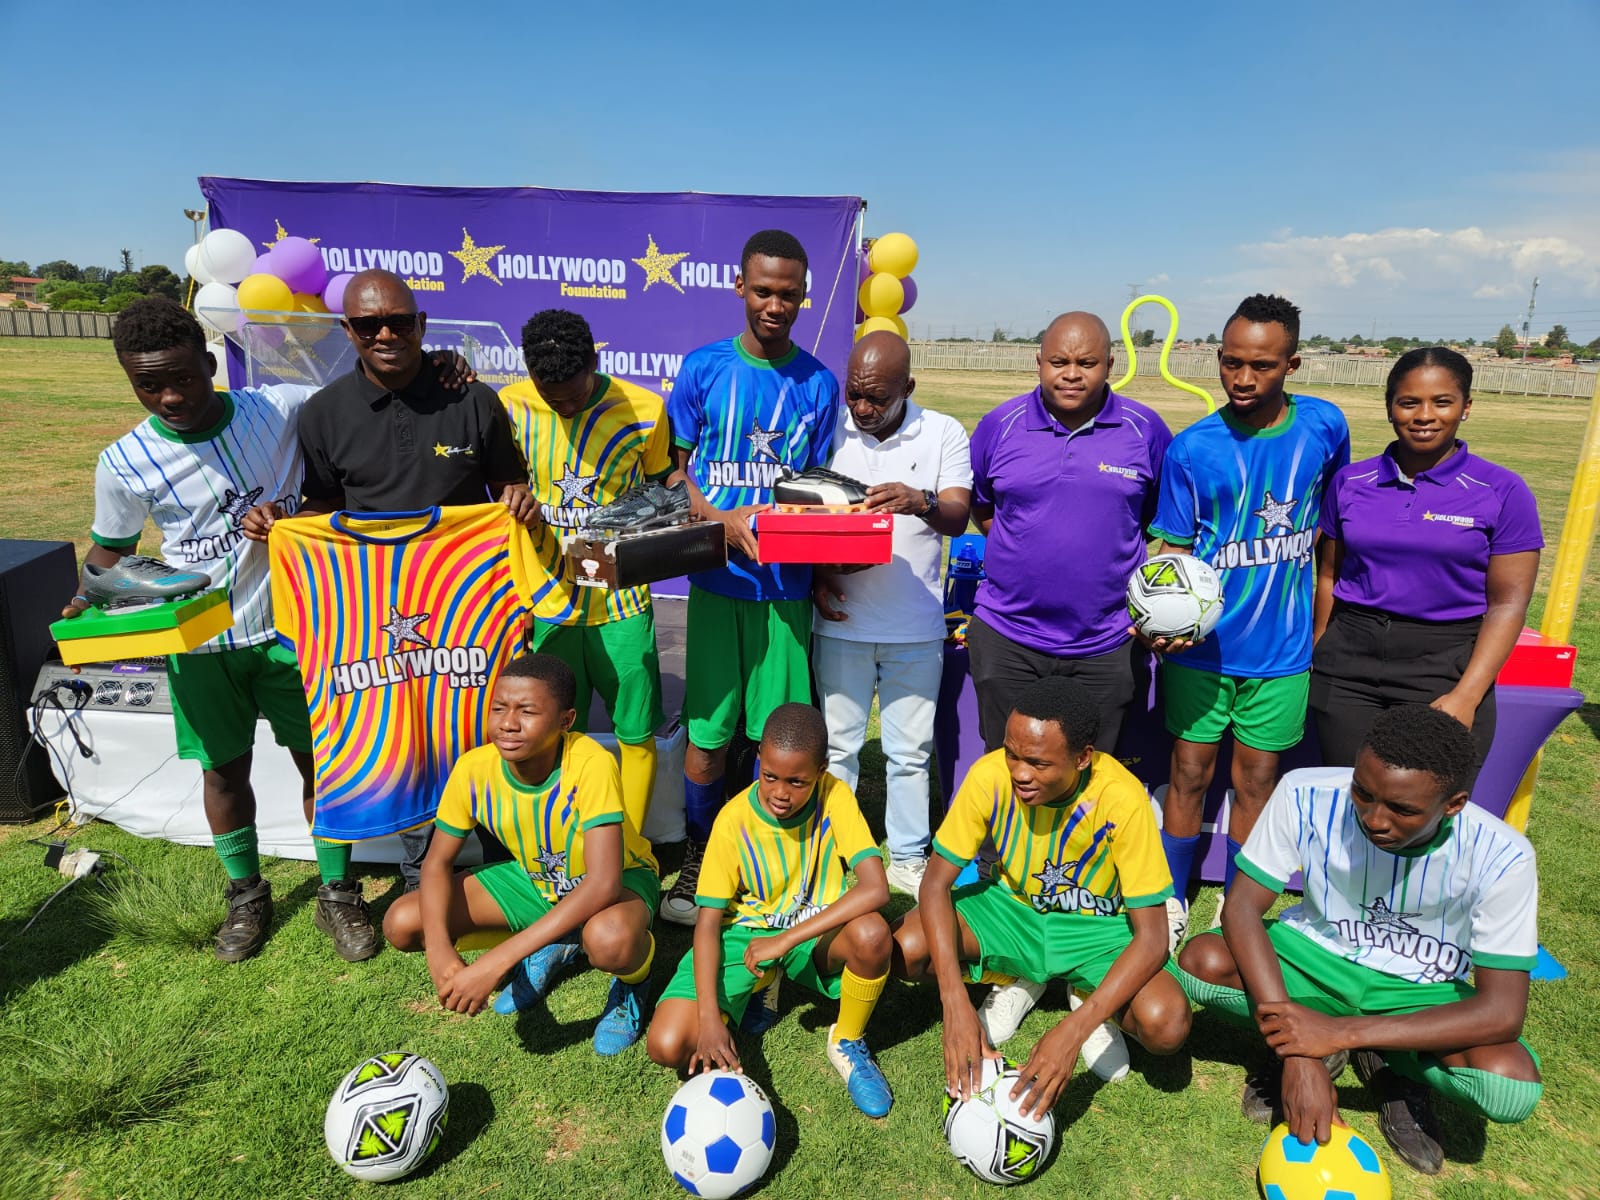 Sports kits that was handing over by the Hollywood Foundation